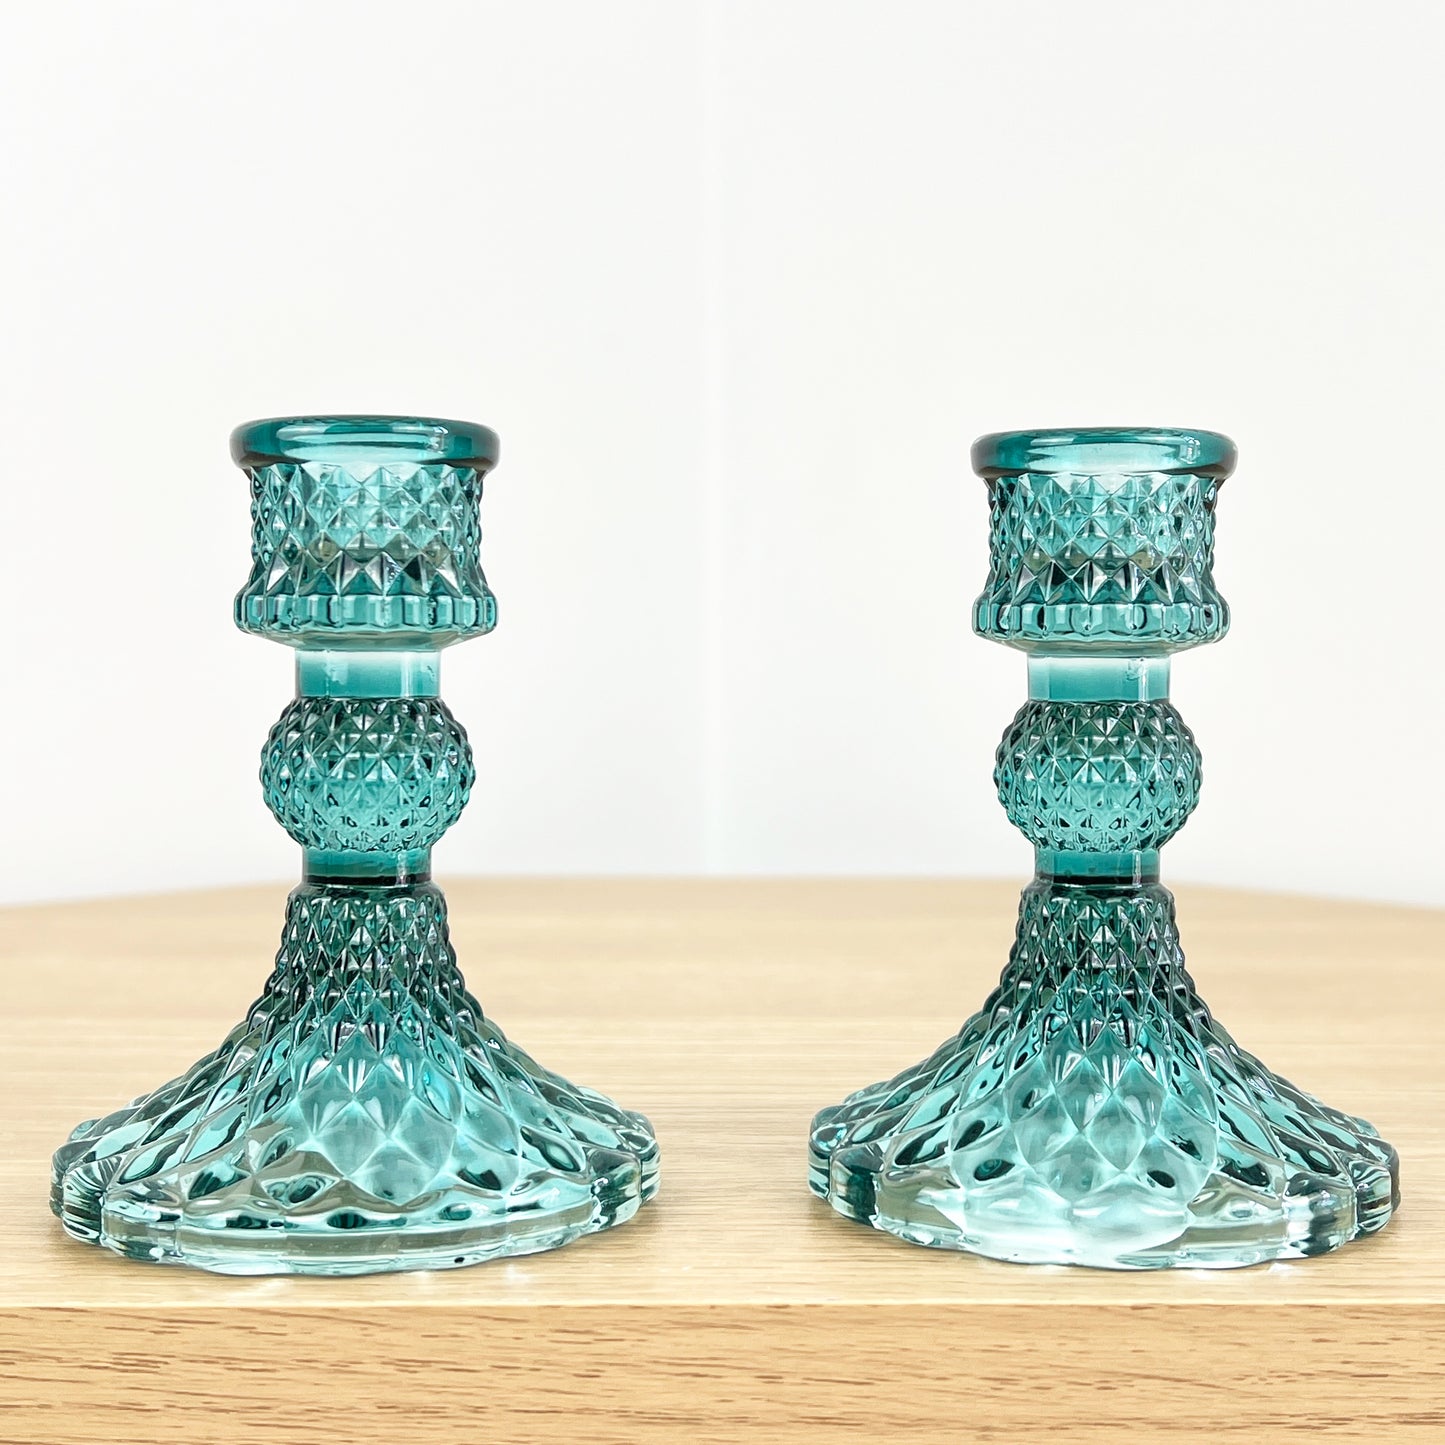 Set of 2 Glass Candlestick Holders – Turquoise Blue